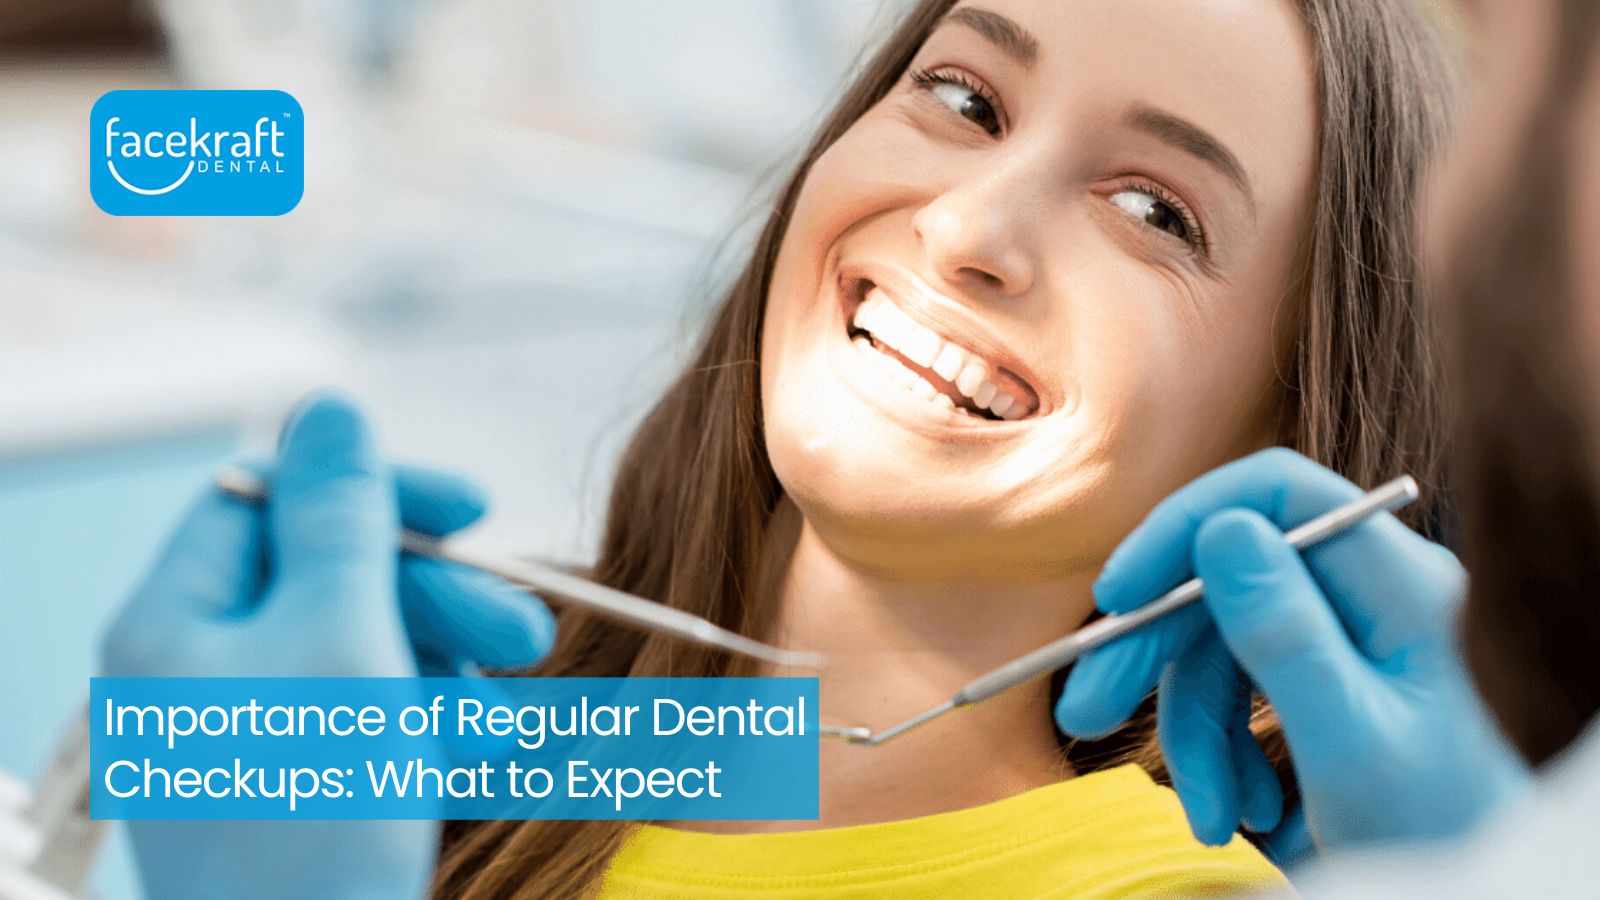 Importance of Regular Dental Checkups: What to Expect